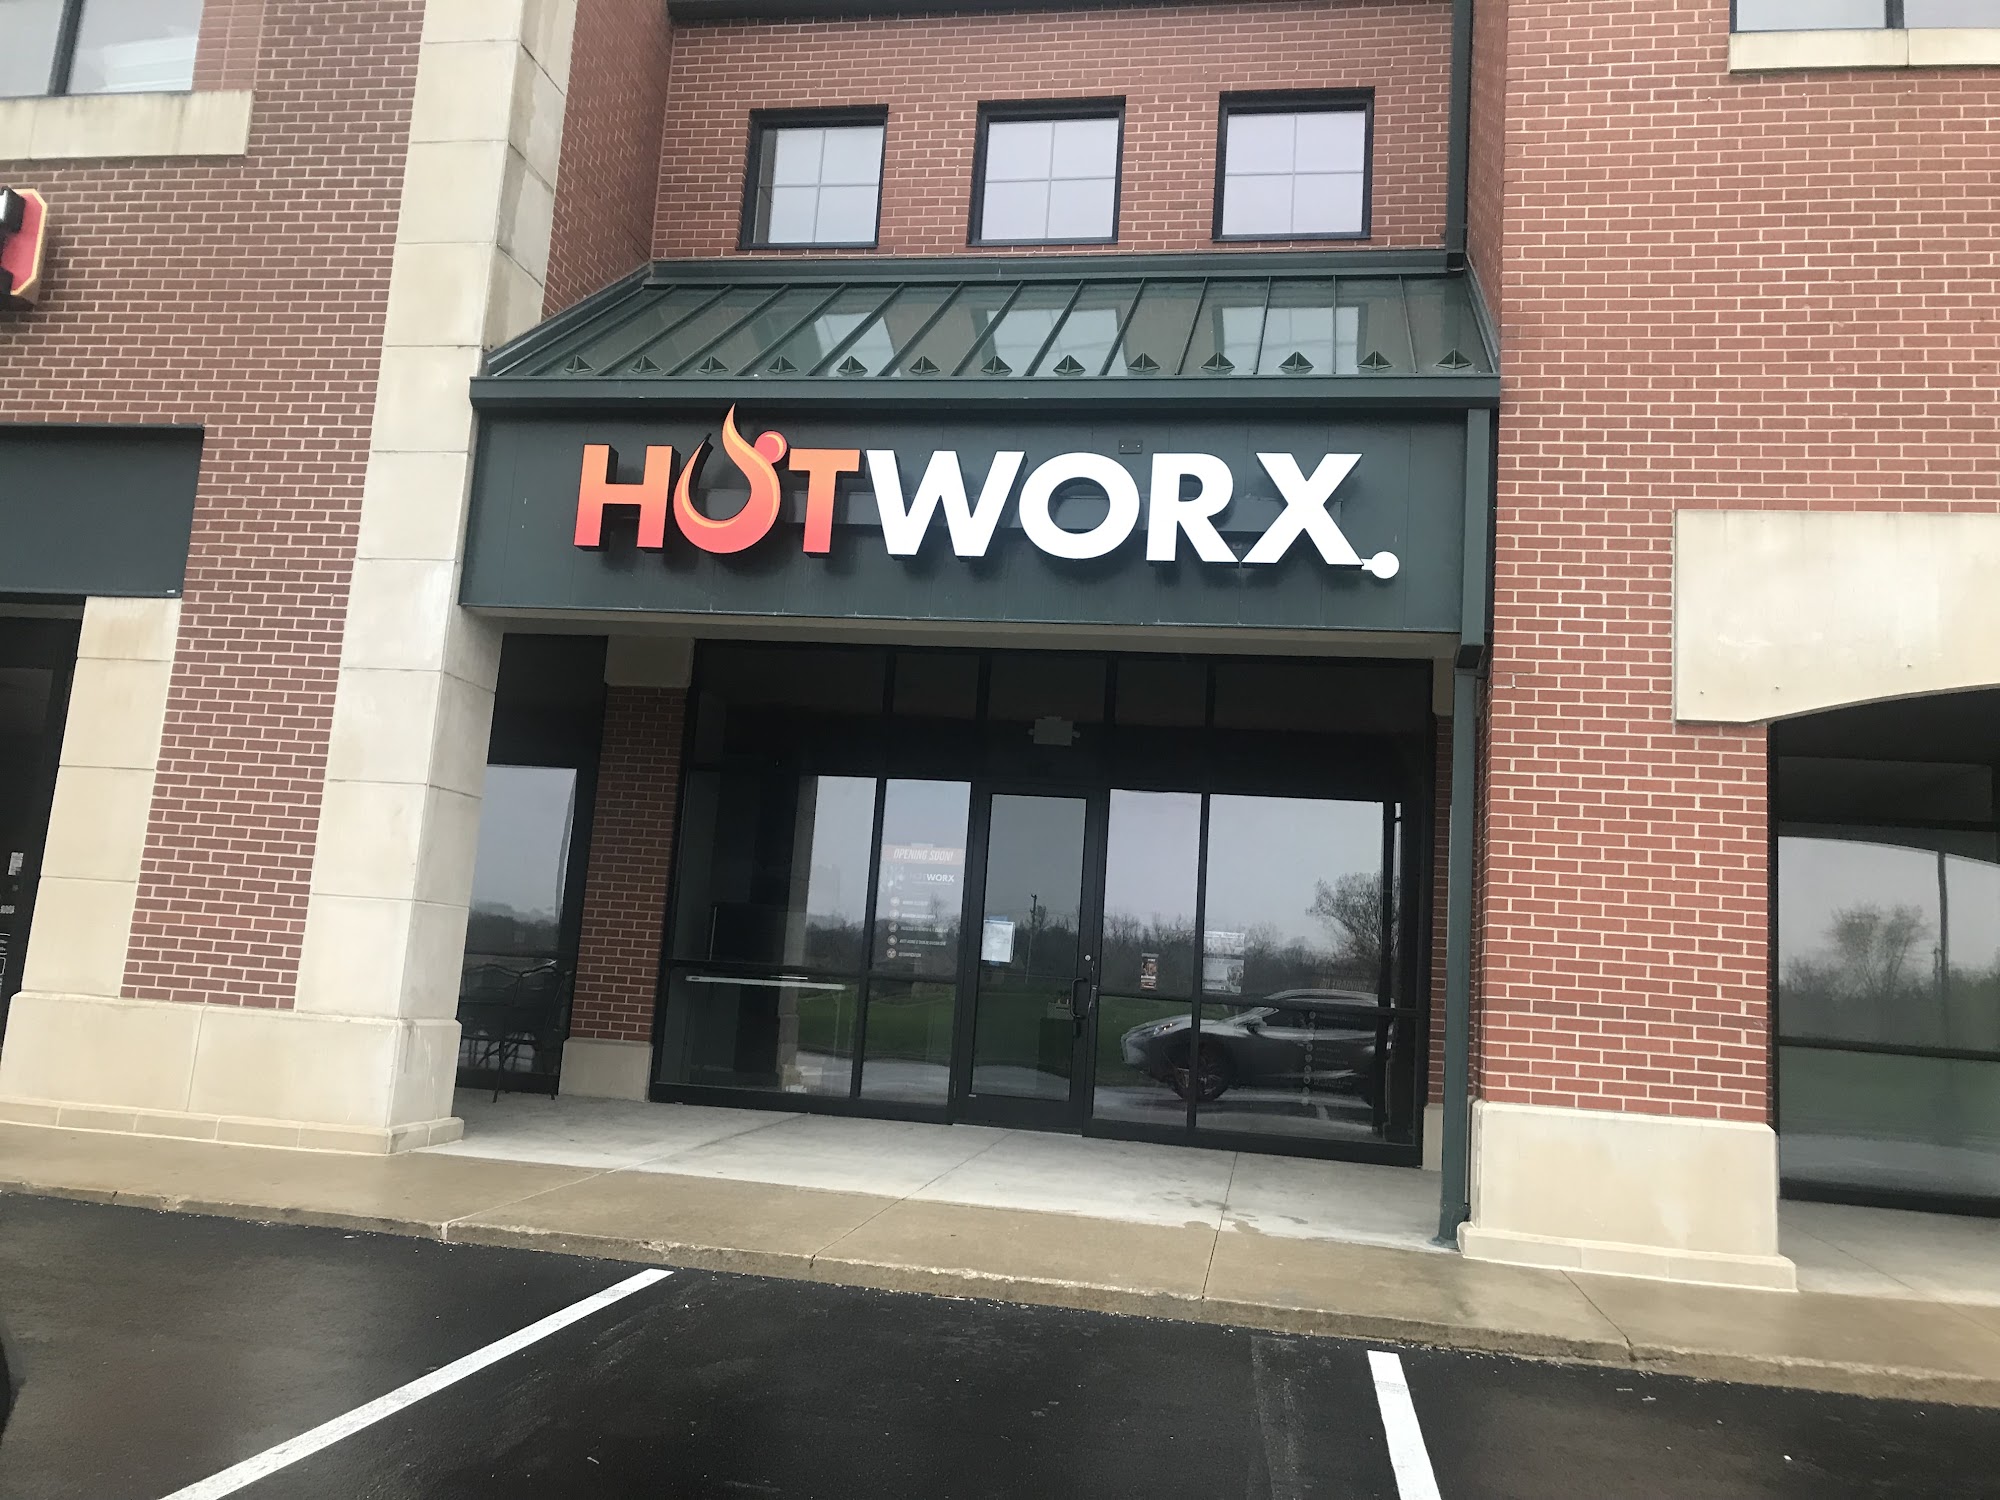 HOTWORX - Columbia, MO - The Broadway Shops